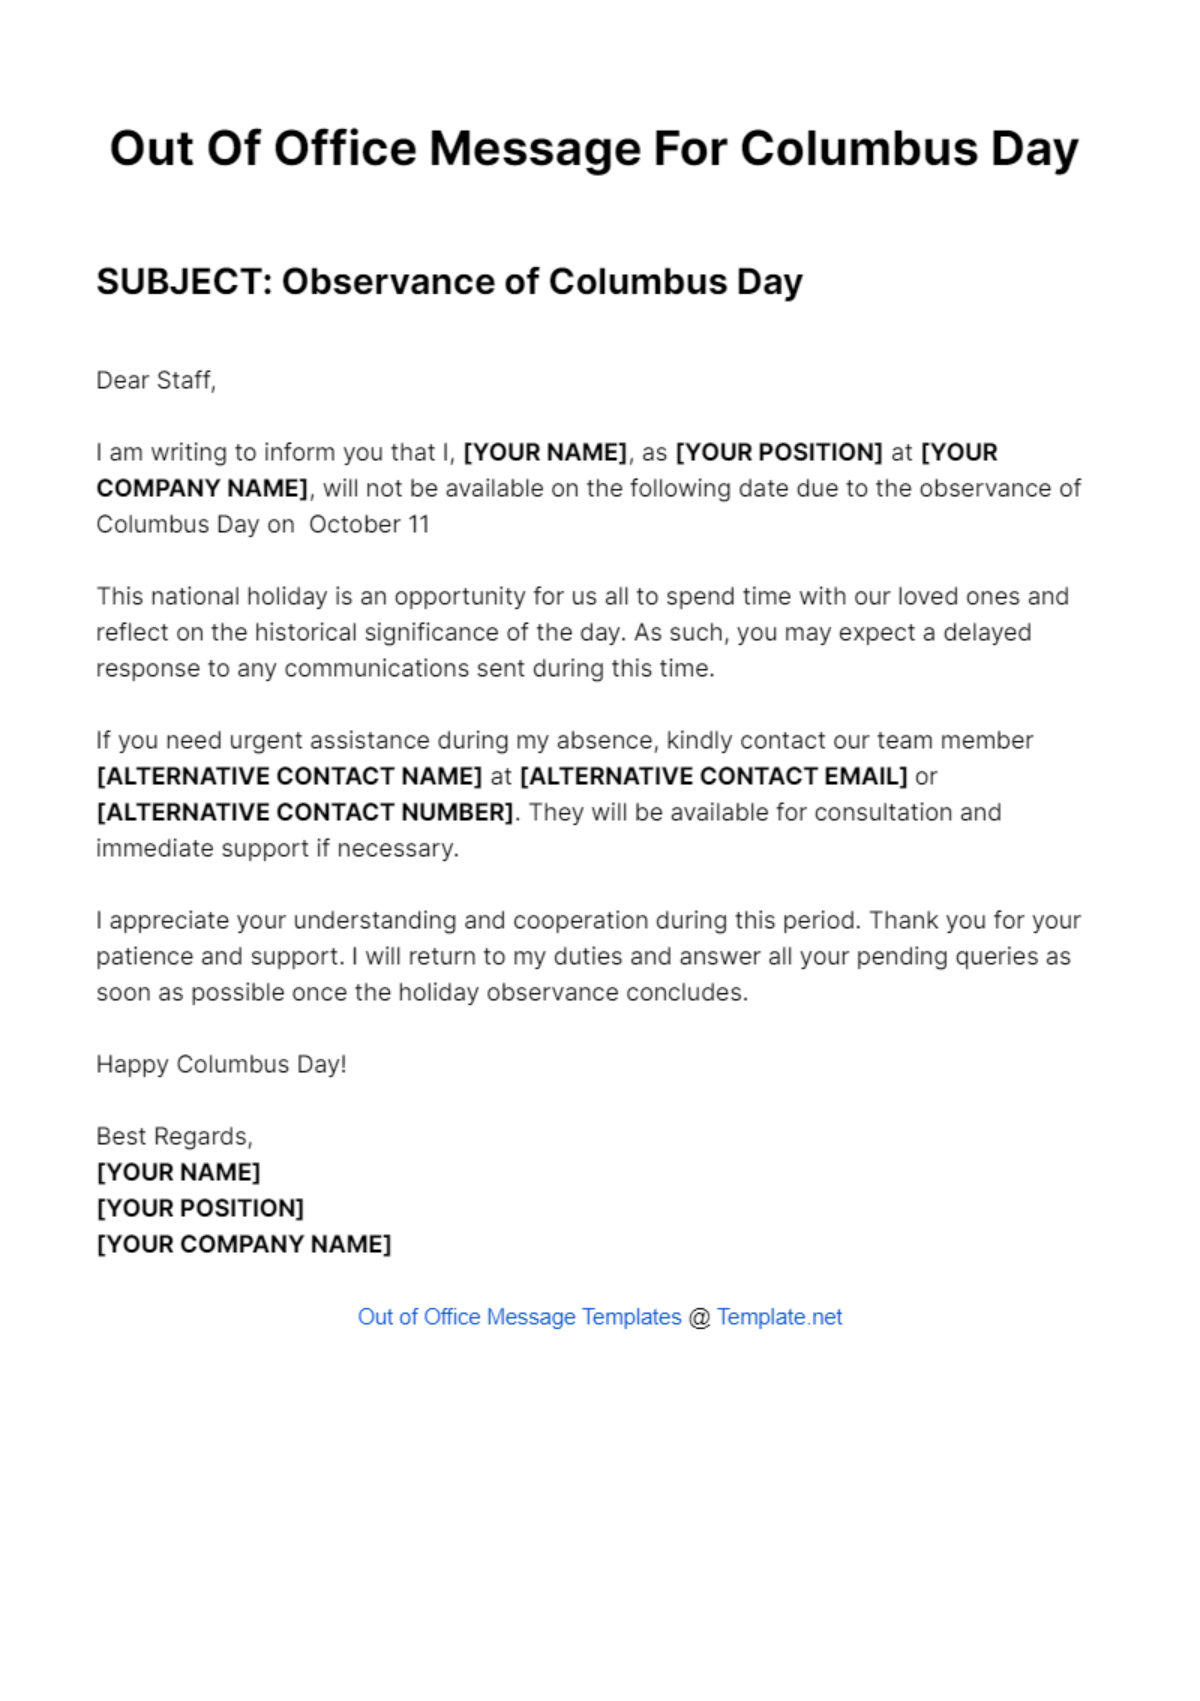 Out Of Office Message For Columbus Day Template